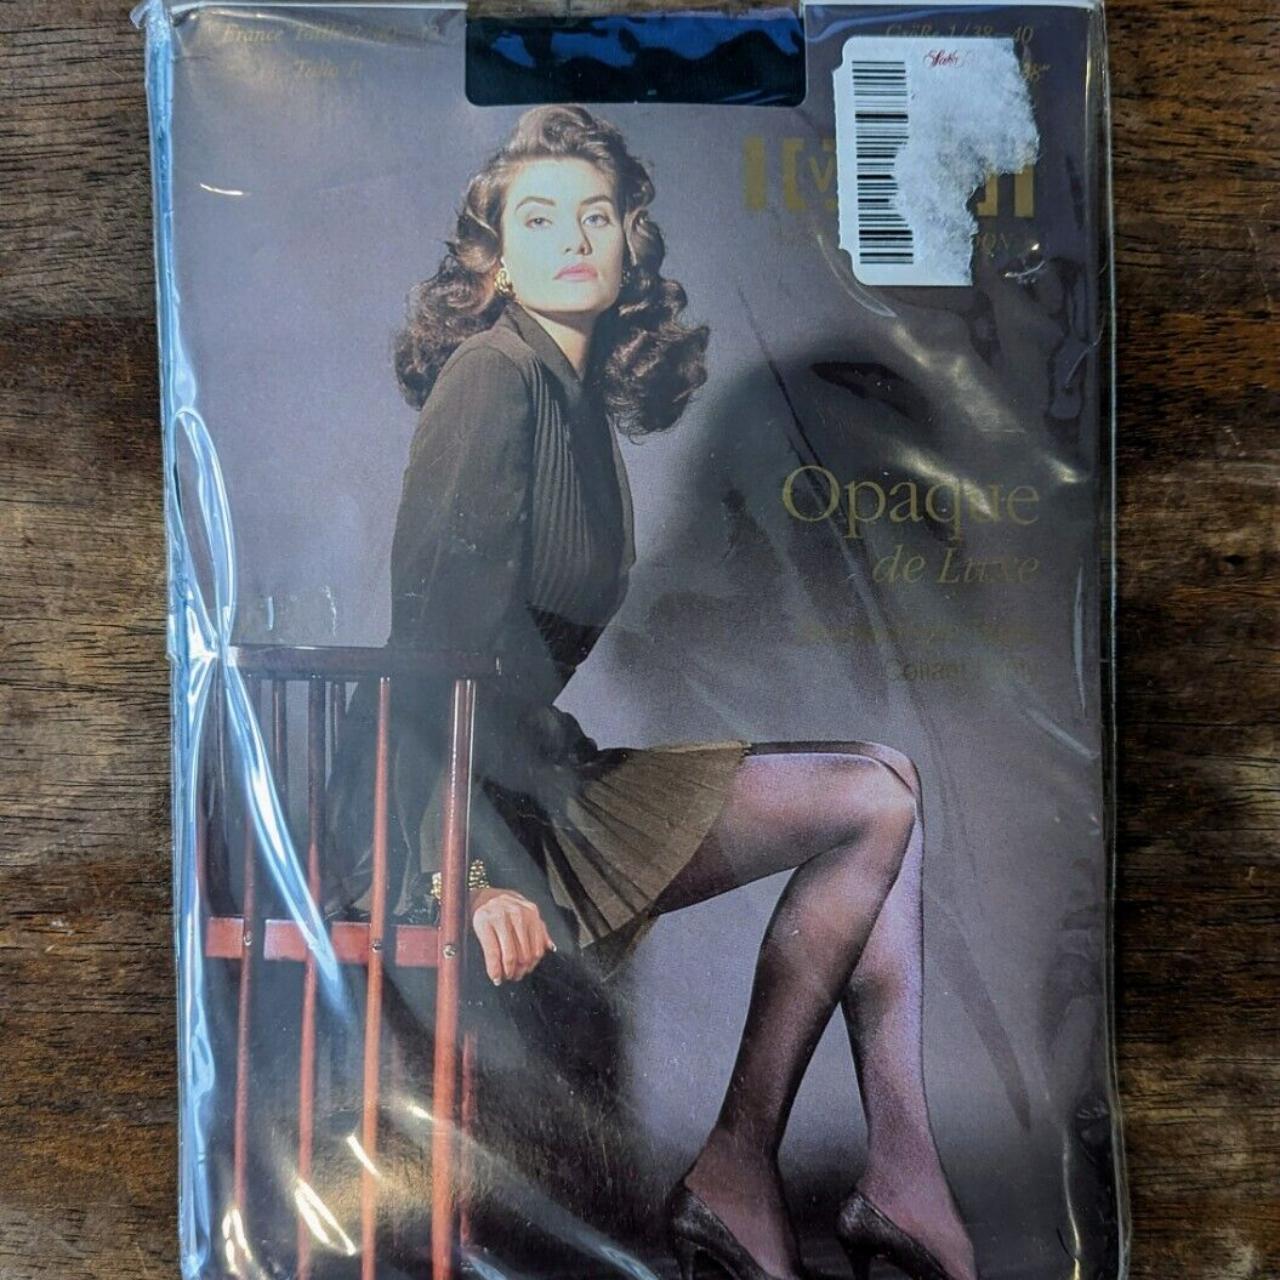 Wolford Pantyhose! Opaque de Luxe - Size Small -... - Depop